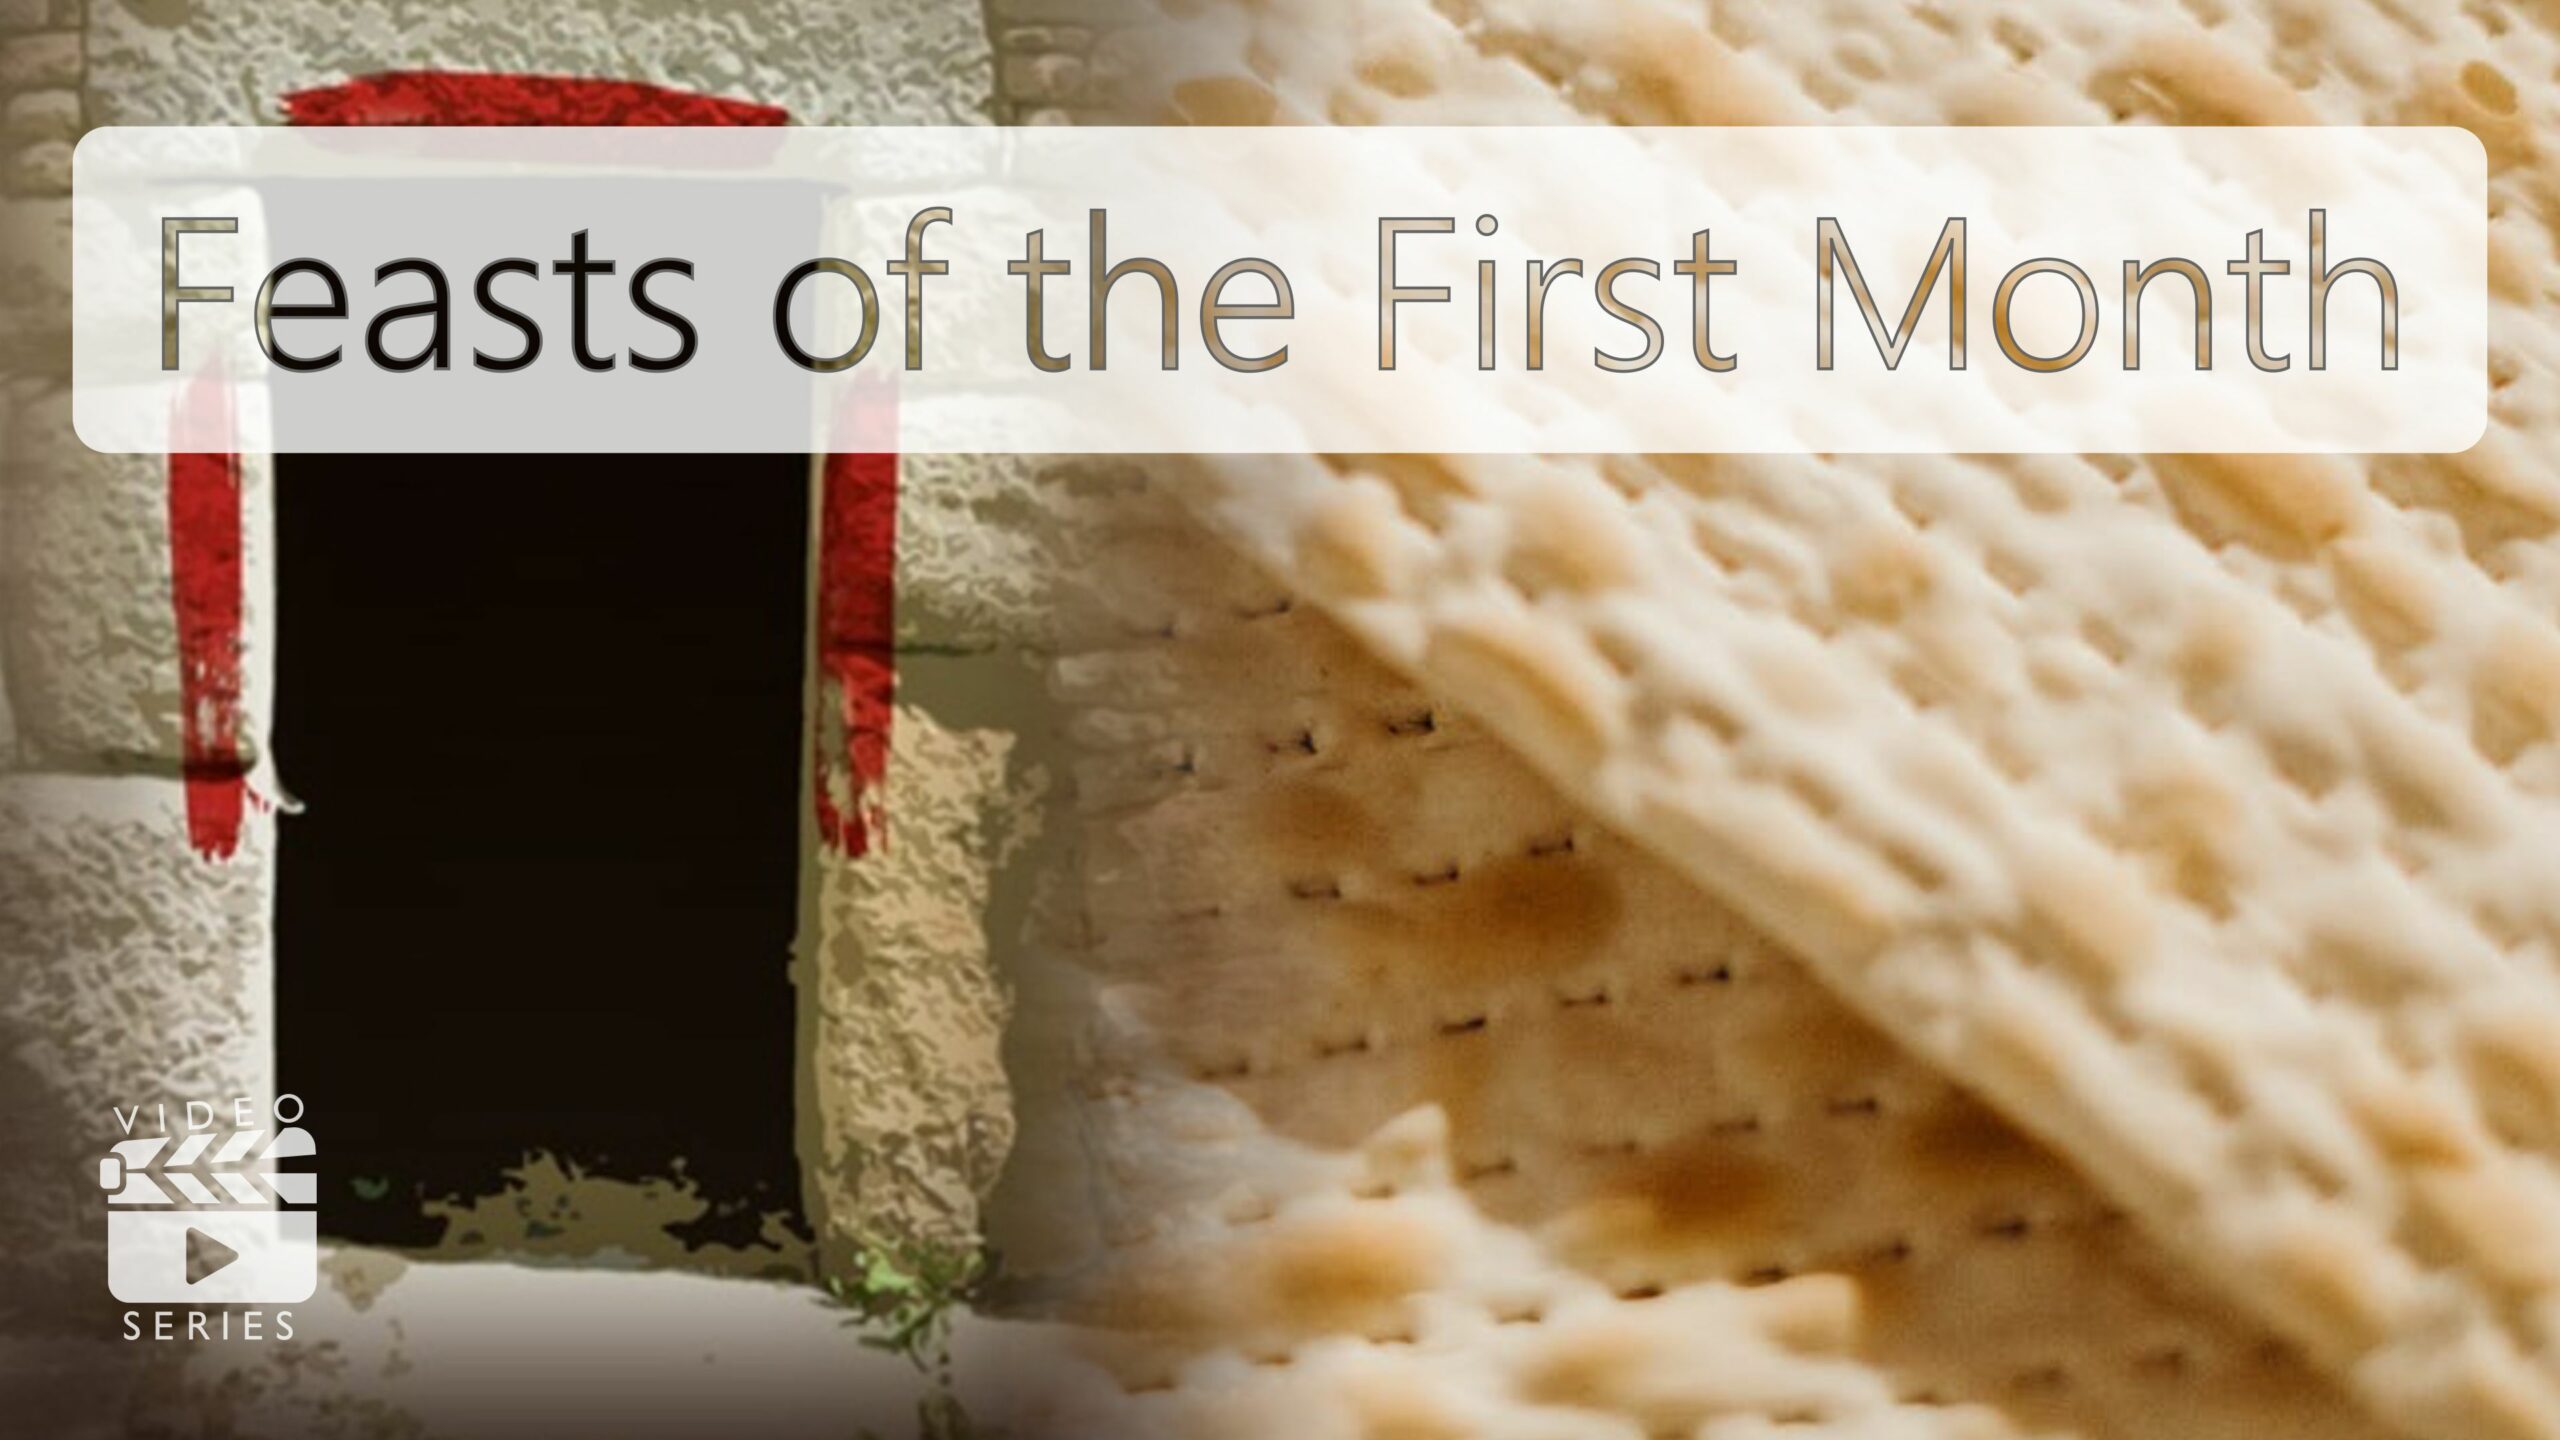 Feasts of the First Month